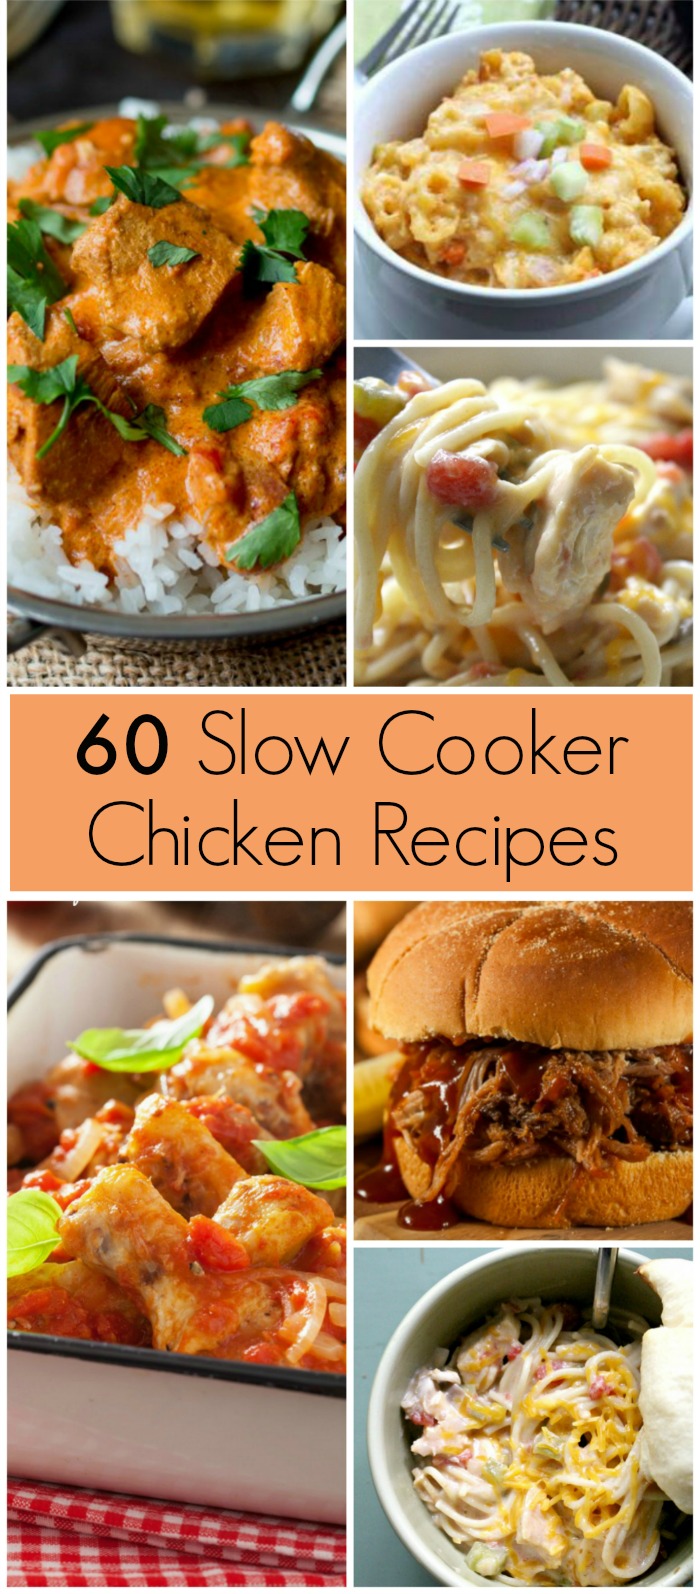 60 Slow Cooker Chicken Recipes